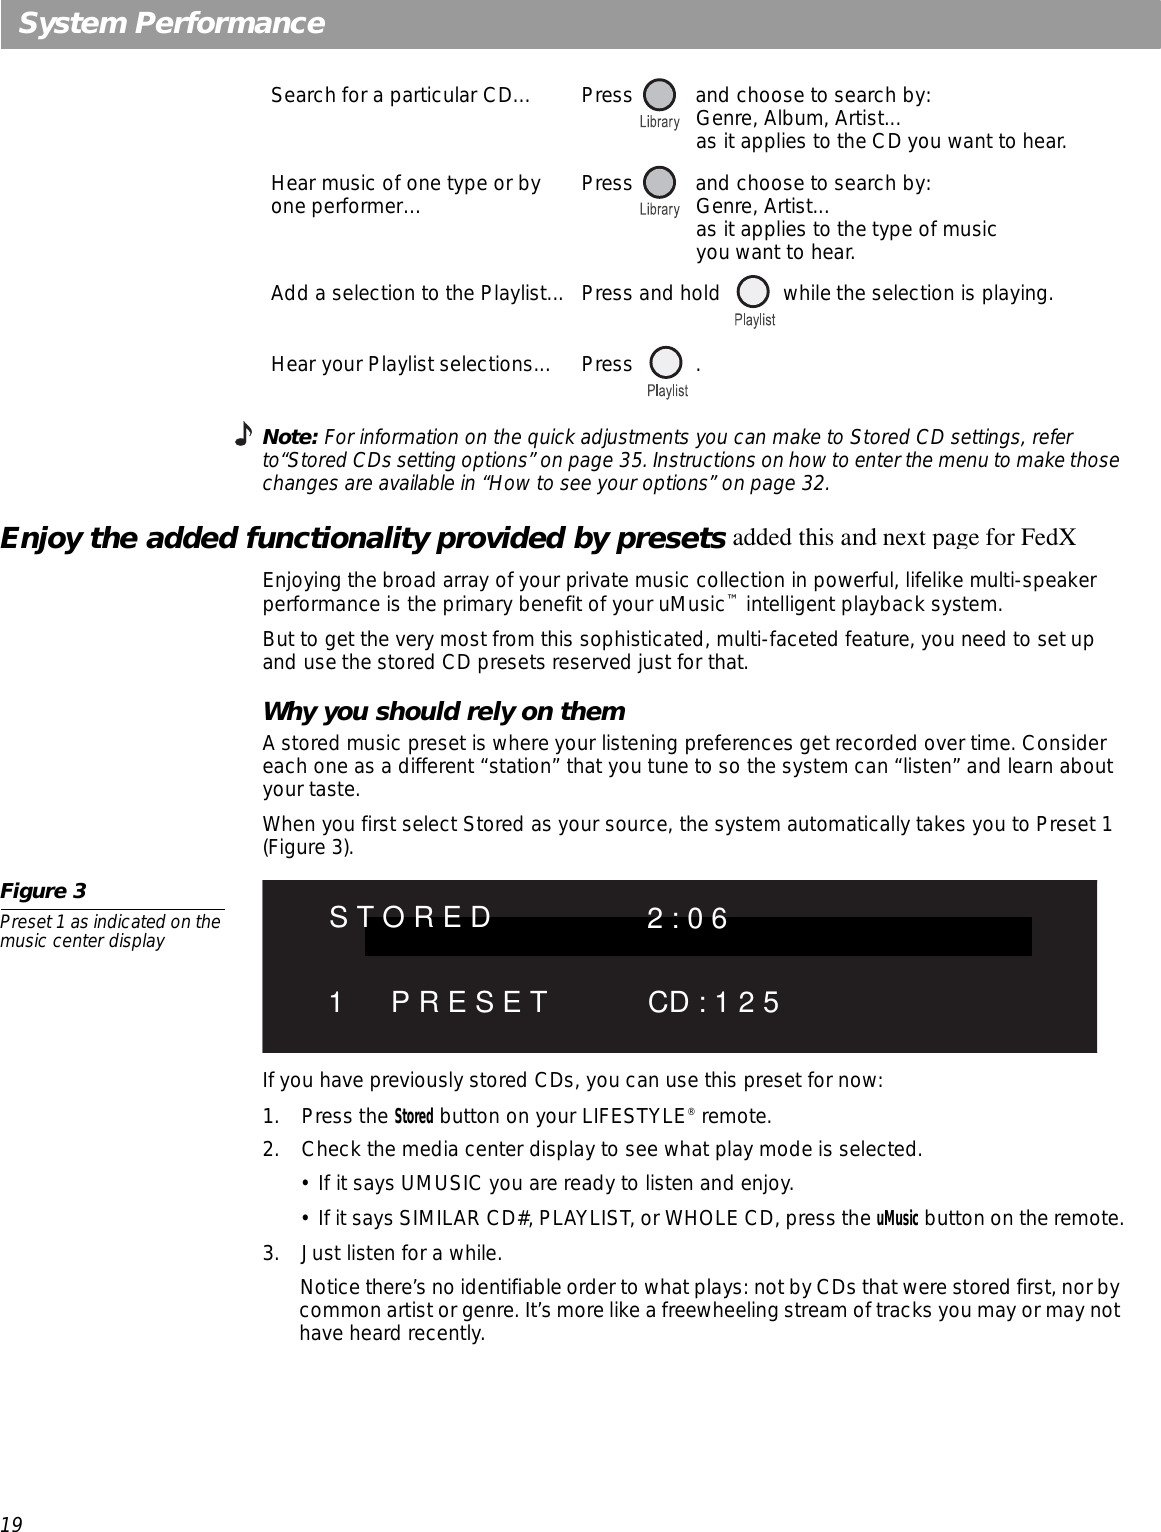 19System PerformanceNote: For information on the quick adjustments you can make to Stored CD settings, refer to“Stored CDs setting options” on page 35. Instructions on how to enter the menu to make those changes are available in “How to see your options” on page 32.Enjoy the added functionality provided by presetsEnjoying the broad array of your private music collection in powerful, lifelike multi-speaker performance is the primary benefit of your uMusic™ intelligent playback system.But to get the very most from this sophisticated, multi-faceted feature, you need to set up and use the stored CD presets reserved just for that. Why you should rely on them A stored music preset is where your listening preferences get recorded over time. Consider each one as a different “station” that you tune to so the system can “listen” and learn about your taste. When you first select Stored as your source, the system automatically takes you to Preset 1 (Figure 3). Figure 3Preset 1 as indicated on the music center displayIf you have previously stored CDs, you can use this preset for now:1. Press the Stored button on your LIFESTYLE® remote.2. Check the media center display to see what play mode is selected.• If it says UMUSIC you are ready to listen and enjoy. • If it says SIMILAR CD#, PLAYLIST, or WHOLE CD, press the uMusic button on the remote.3. Just listen for a while. Notice there’s no identifiable order to what plays: not by CDs that were stored first, nor by common artist or genre. It’s more like a freewheeling stream of tracks you may or may not have heard recently. Search for a particular CD… Press  and choose to search by: Genre, Album, Artist... as it applies to the CD you want to hear.Hear music of one type or by one performer… Press  and choose to search by: Genre, Artist... as it applies to the type of music  you want to hear.Add a selection to the Playlist... Press and hold  while the selection is playing.Hear your Playlist selections... Press  .added this and next page for FedXS T O R E D 2 : 0 61 P R E S E T CD : 1 2 5